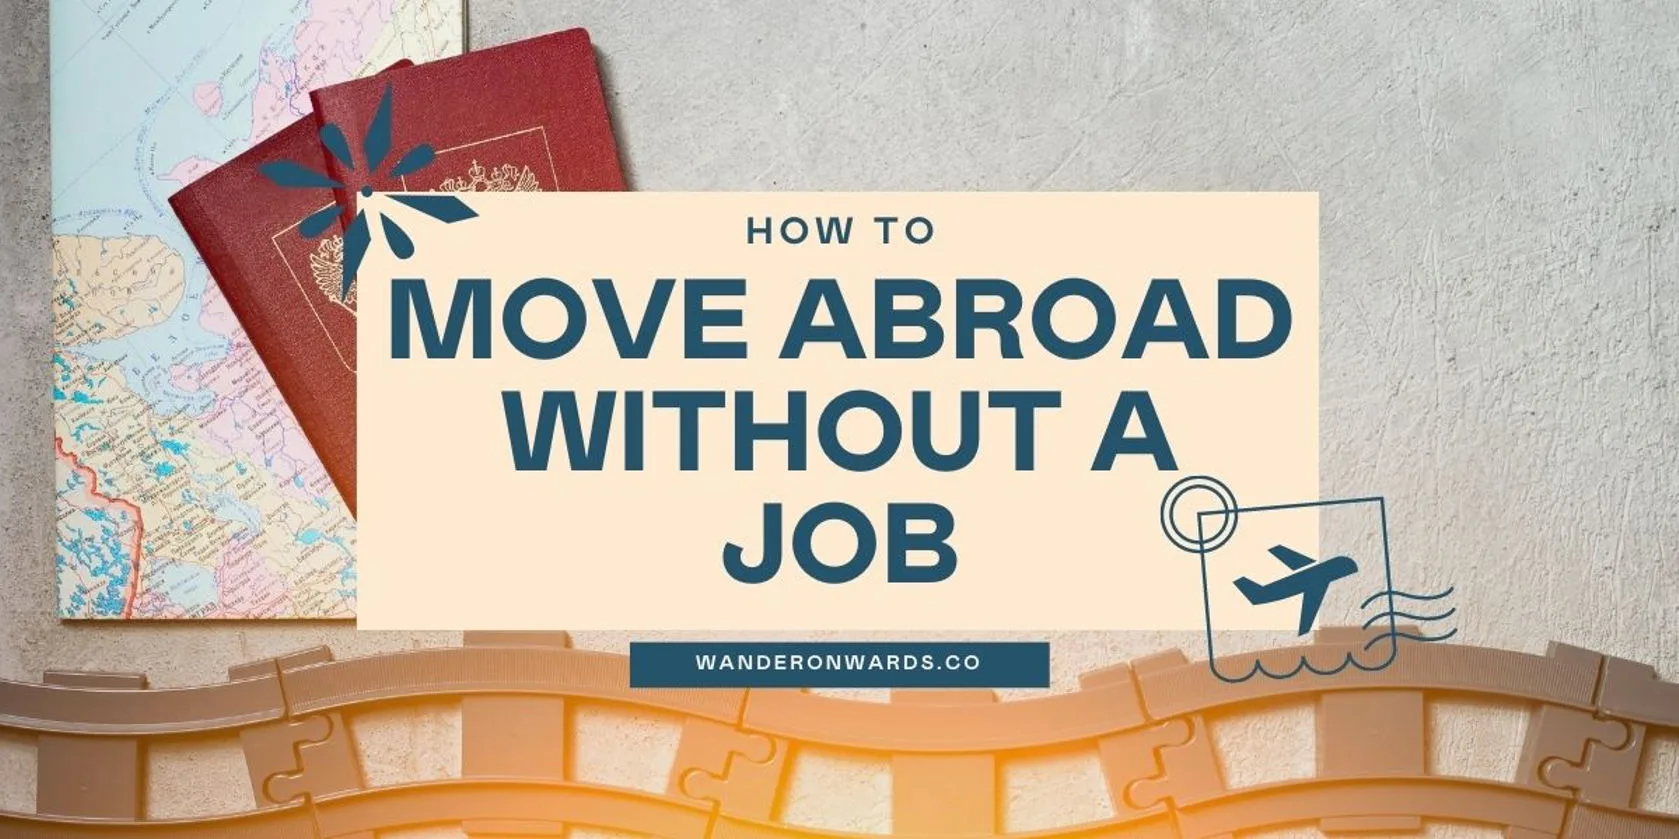 How to Work Abroad with No Money - Endorse Jobs